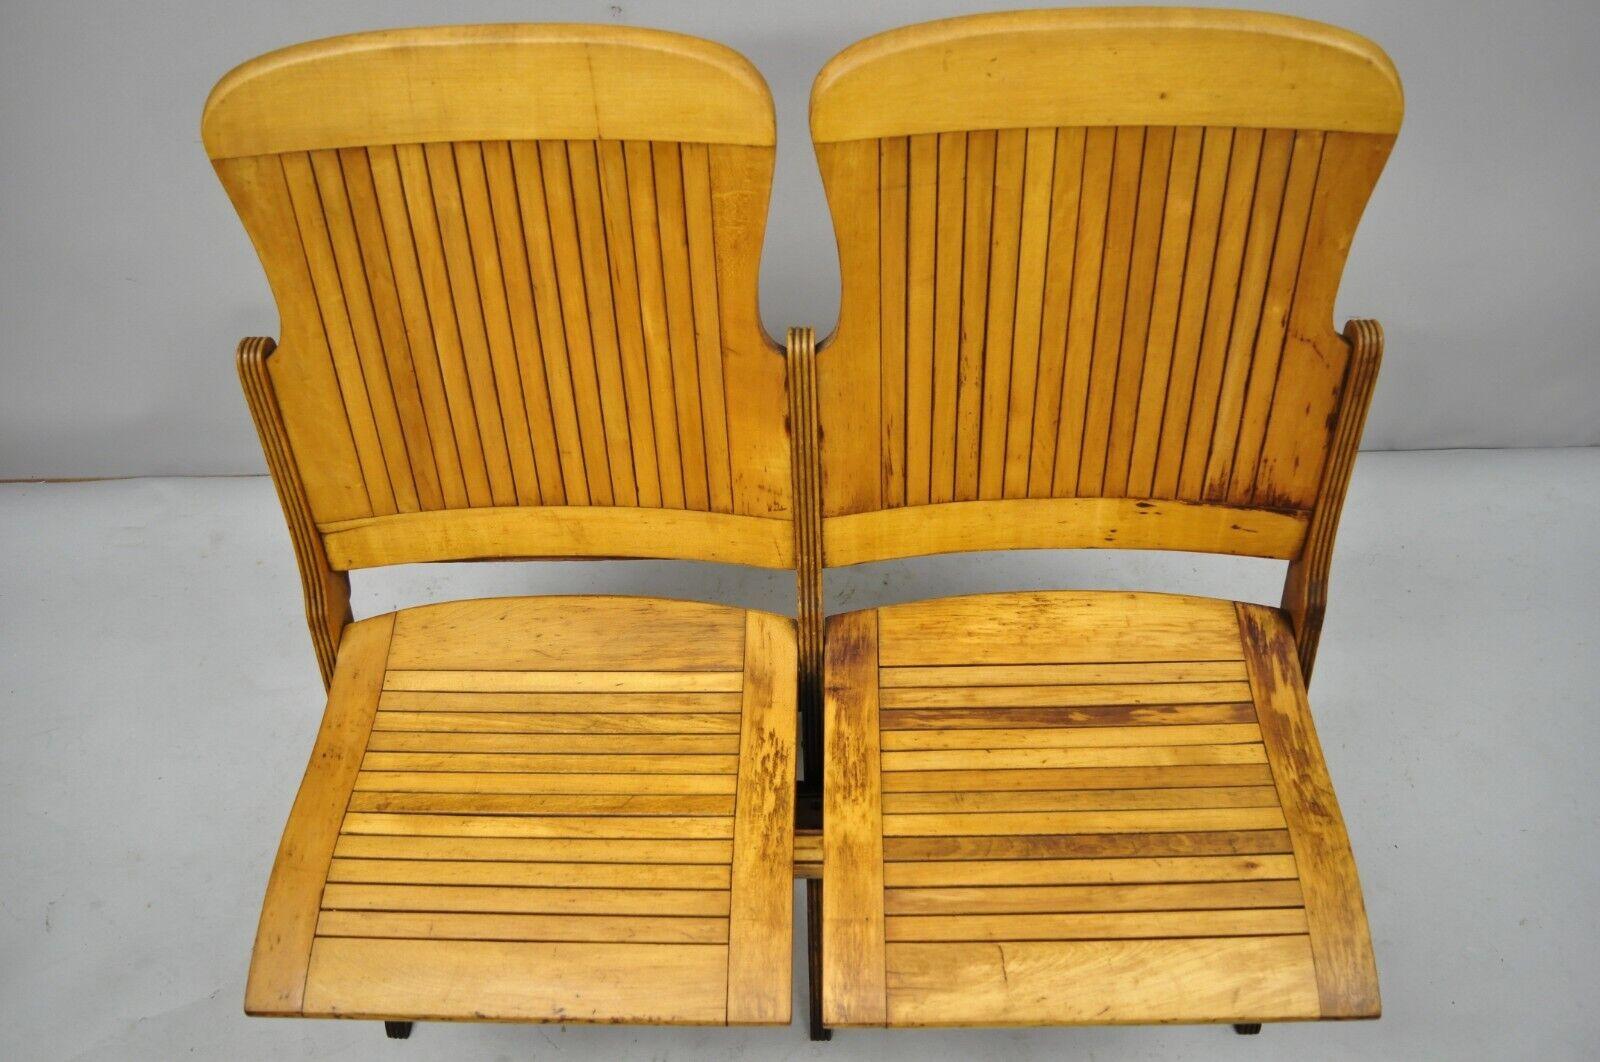 Antique Vintage Wood Slat Double Folding Seat Theater School Old Pew Chair In Good Condition For Sale In Philadelphia, PA